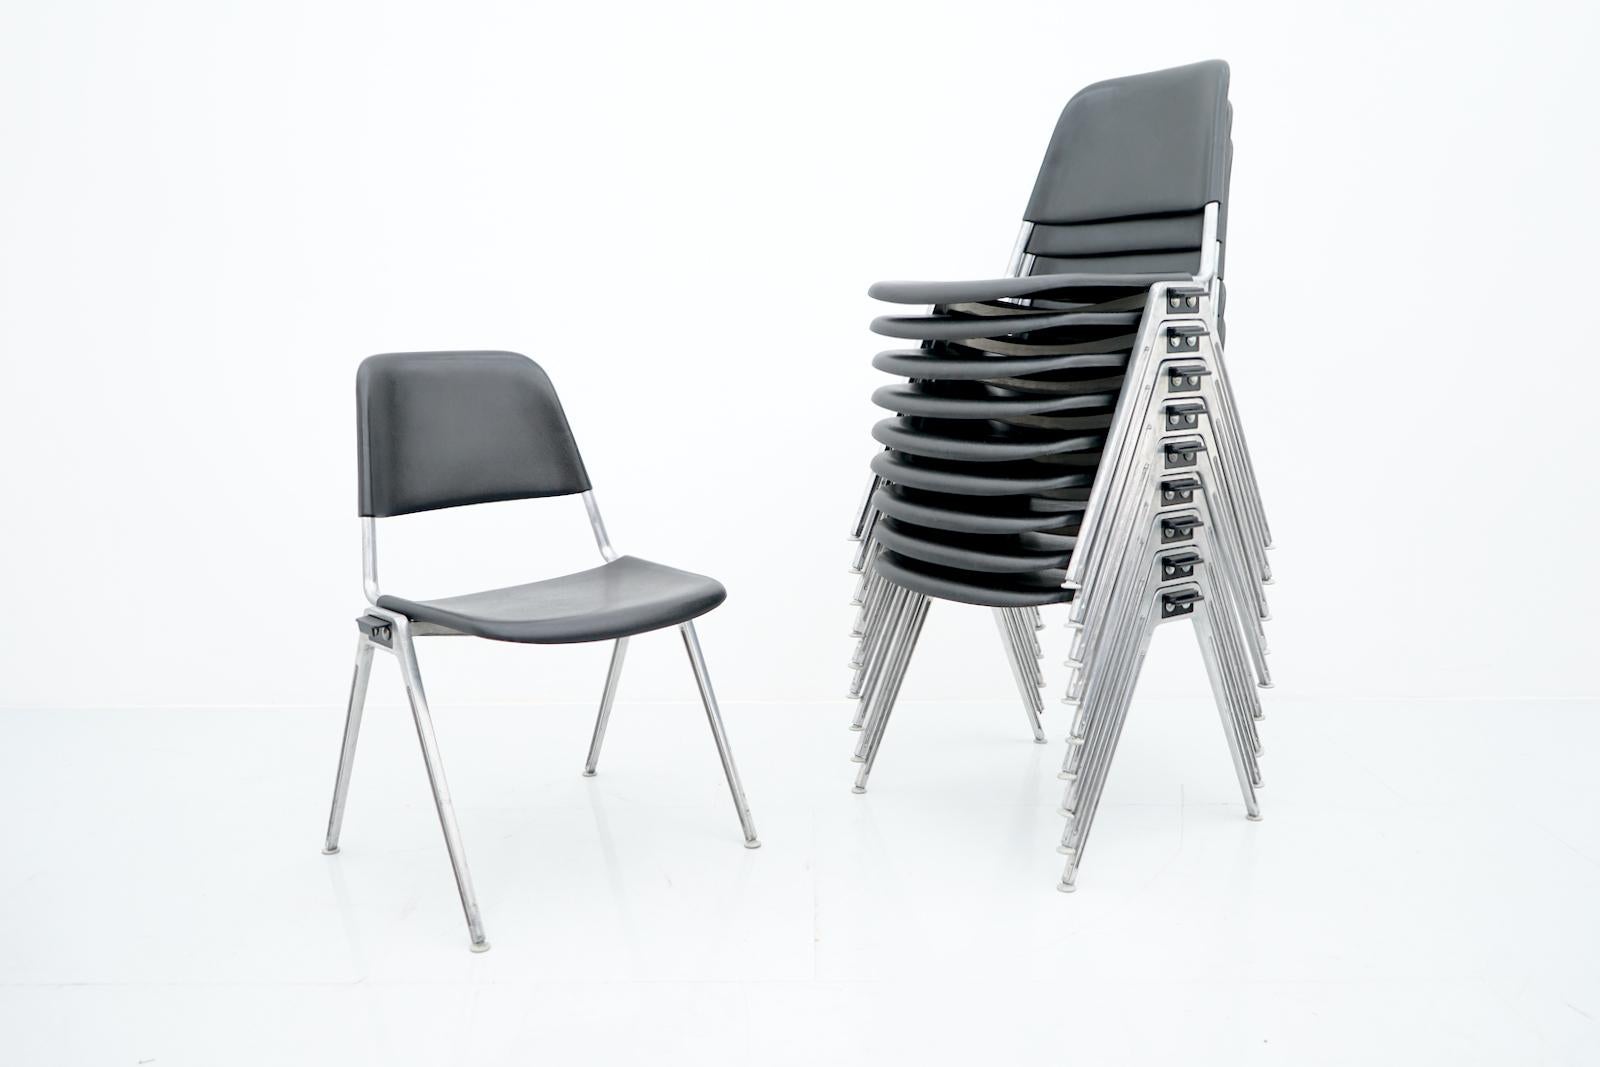 One of ten stacking chairs Model 1601 by Don Albinson for Knoll International. Black plastic seat and backrest, aluminum base. 
Good to very good condition.
Dimensions: Width: 19.68 in. ( 53 cm) Depth: 19.68 in. (54 cm) Height: 30.31 in. (81 cm)